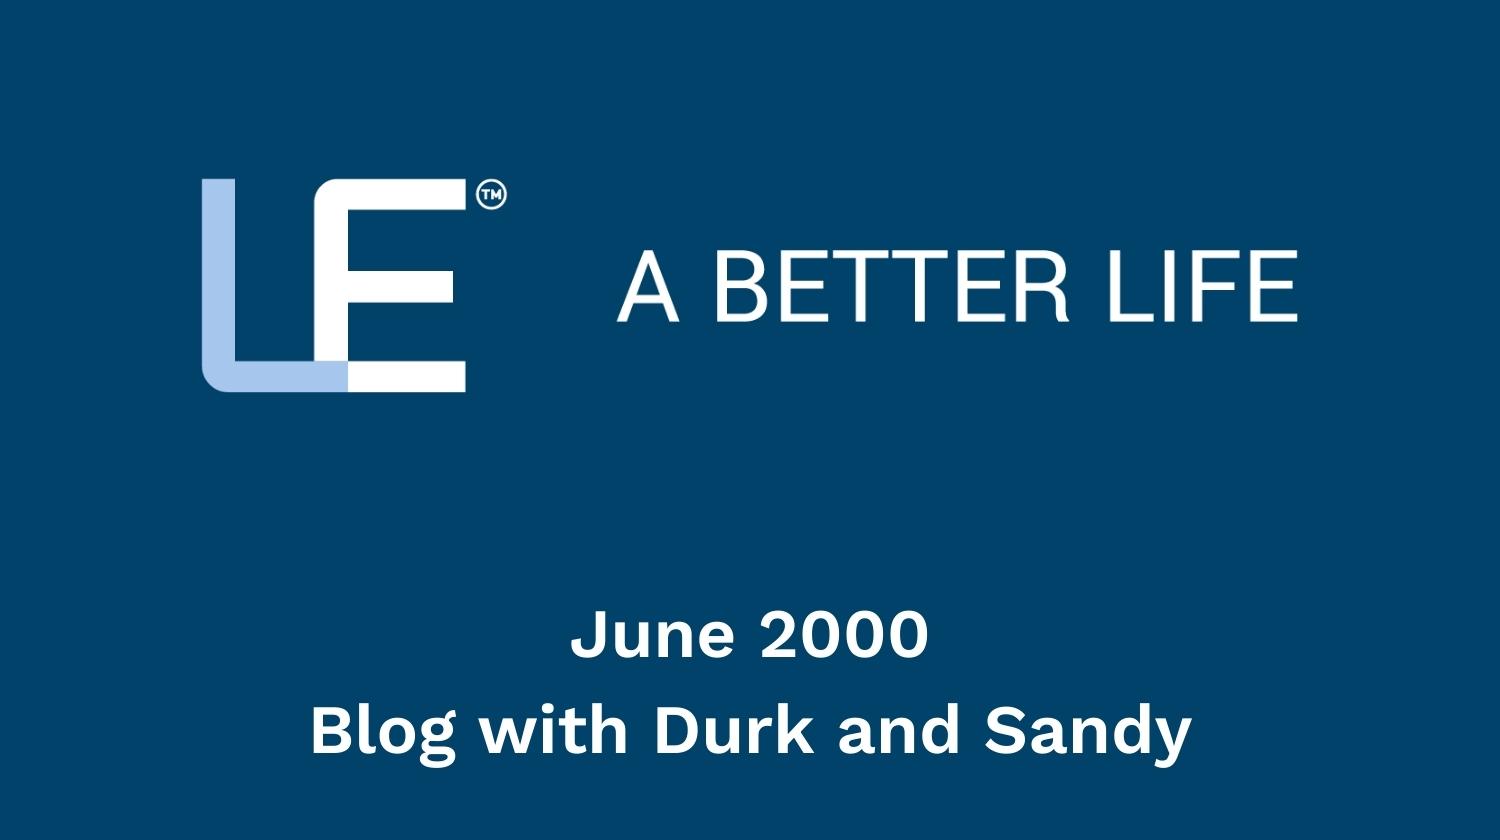 June 2000 Blog with Durk and Sandy